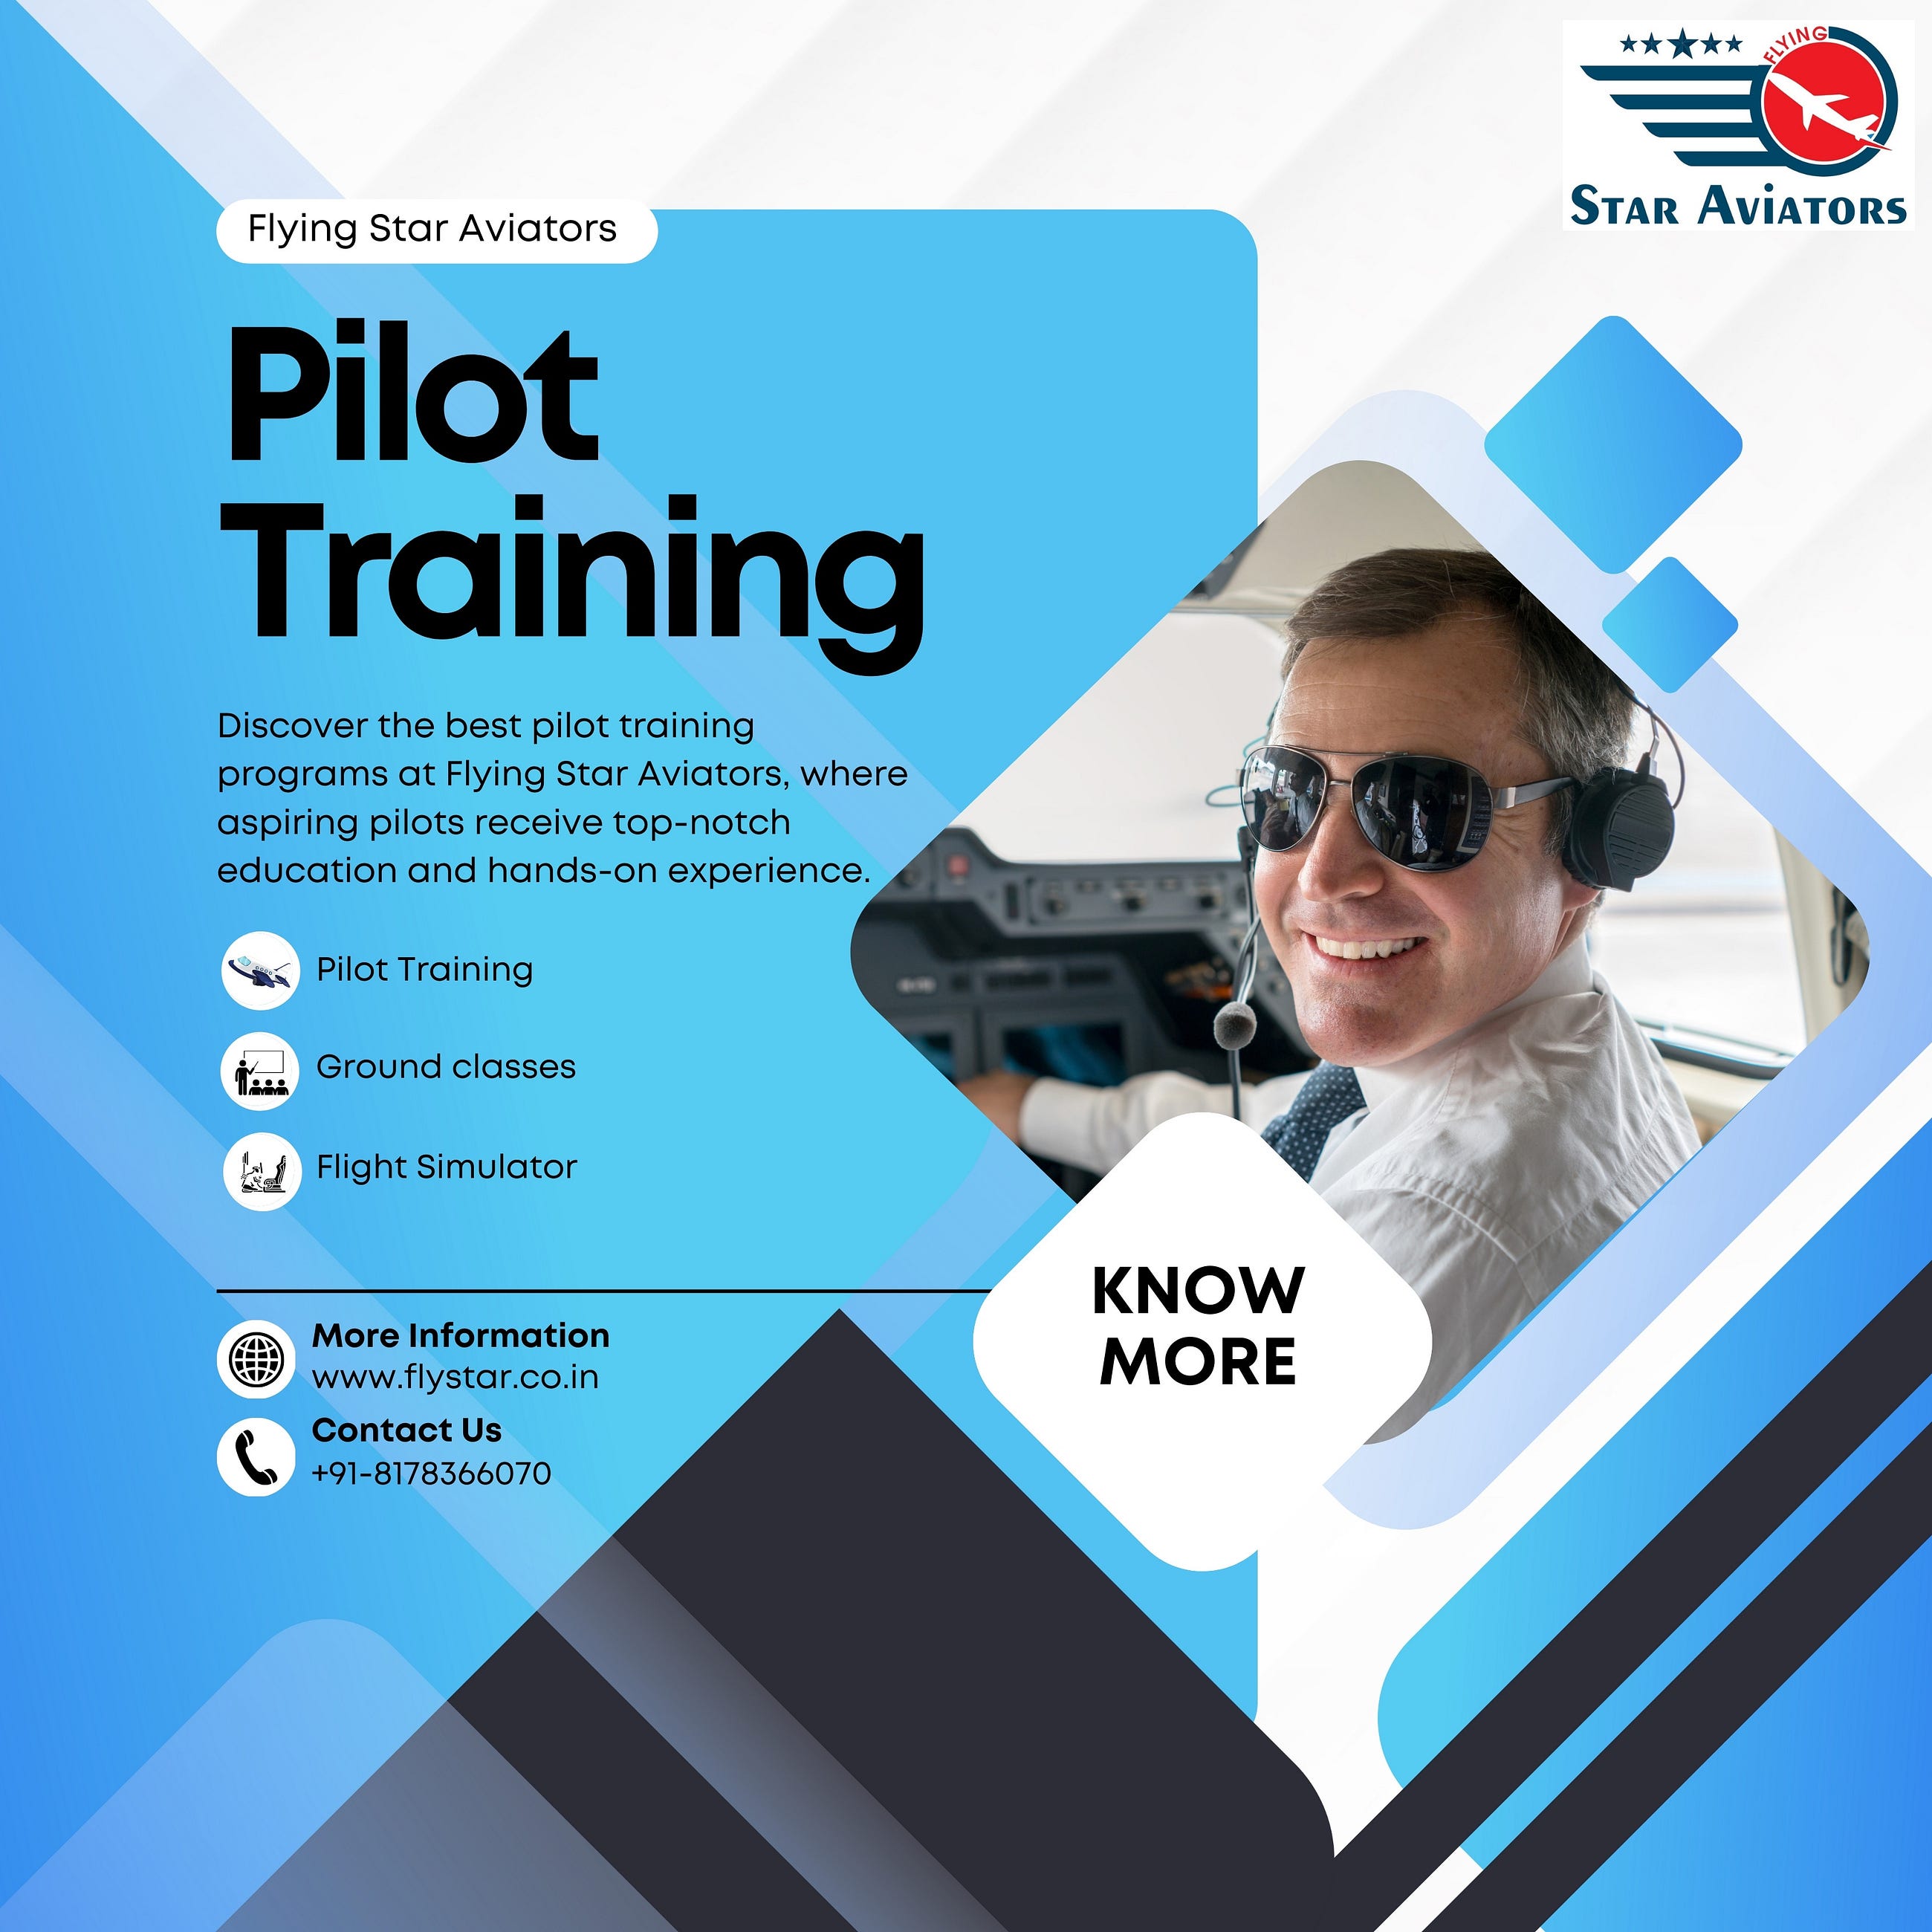 Master the Skies with Pilot Training at Flying Star Aviators